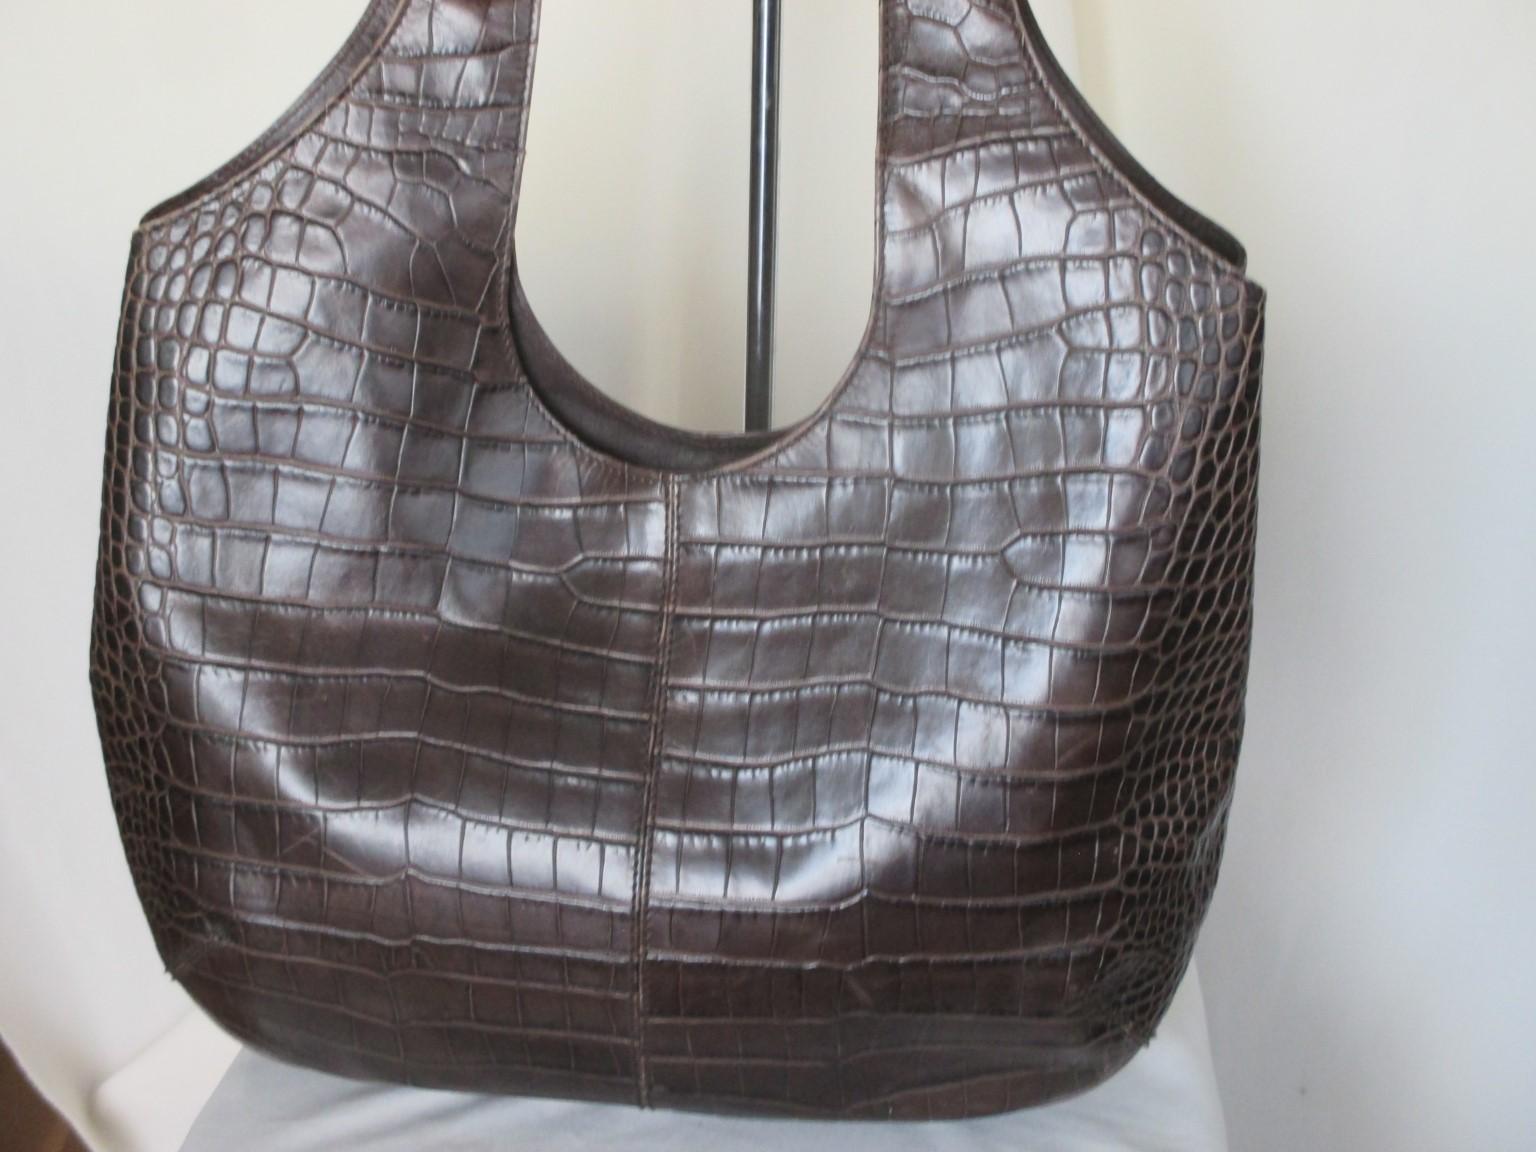 Classic vintage embossed leather brown hobo bag.

We offer more luxury bags and furs, view our frontstore.

Details:
Salvatore Ferragamo brown croc-embossed calf leather hobo bag
Grand size
Woven lining
2 pockets, a single zip pocket at interior and